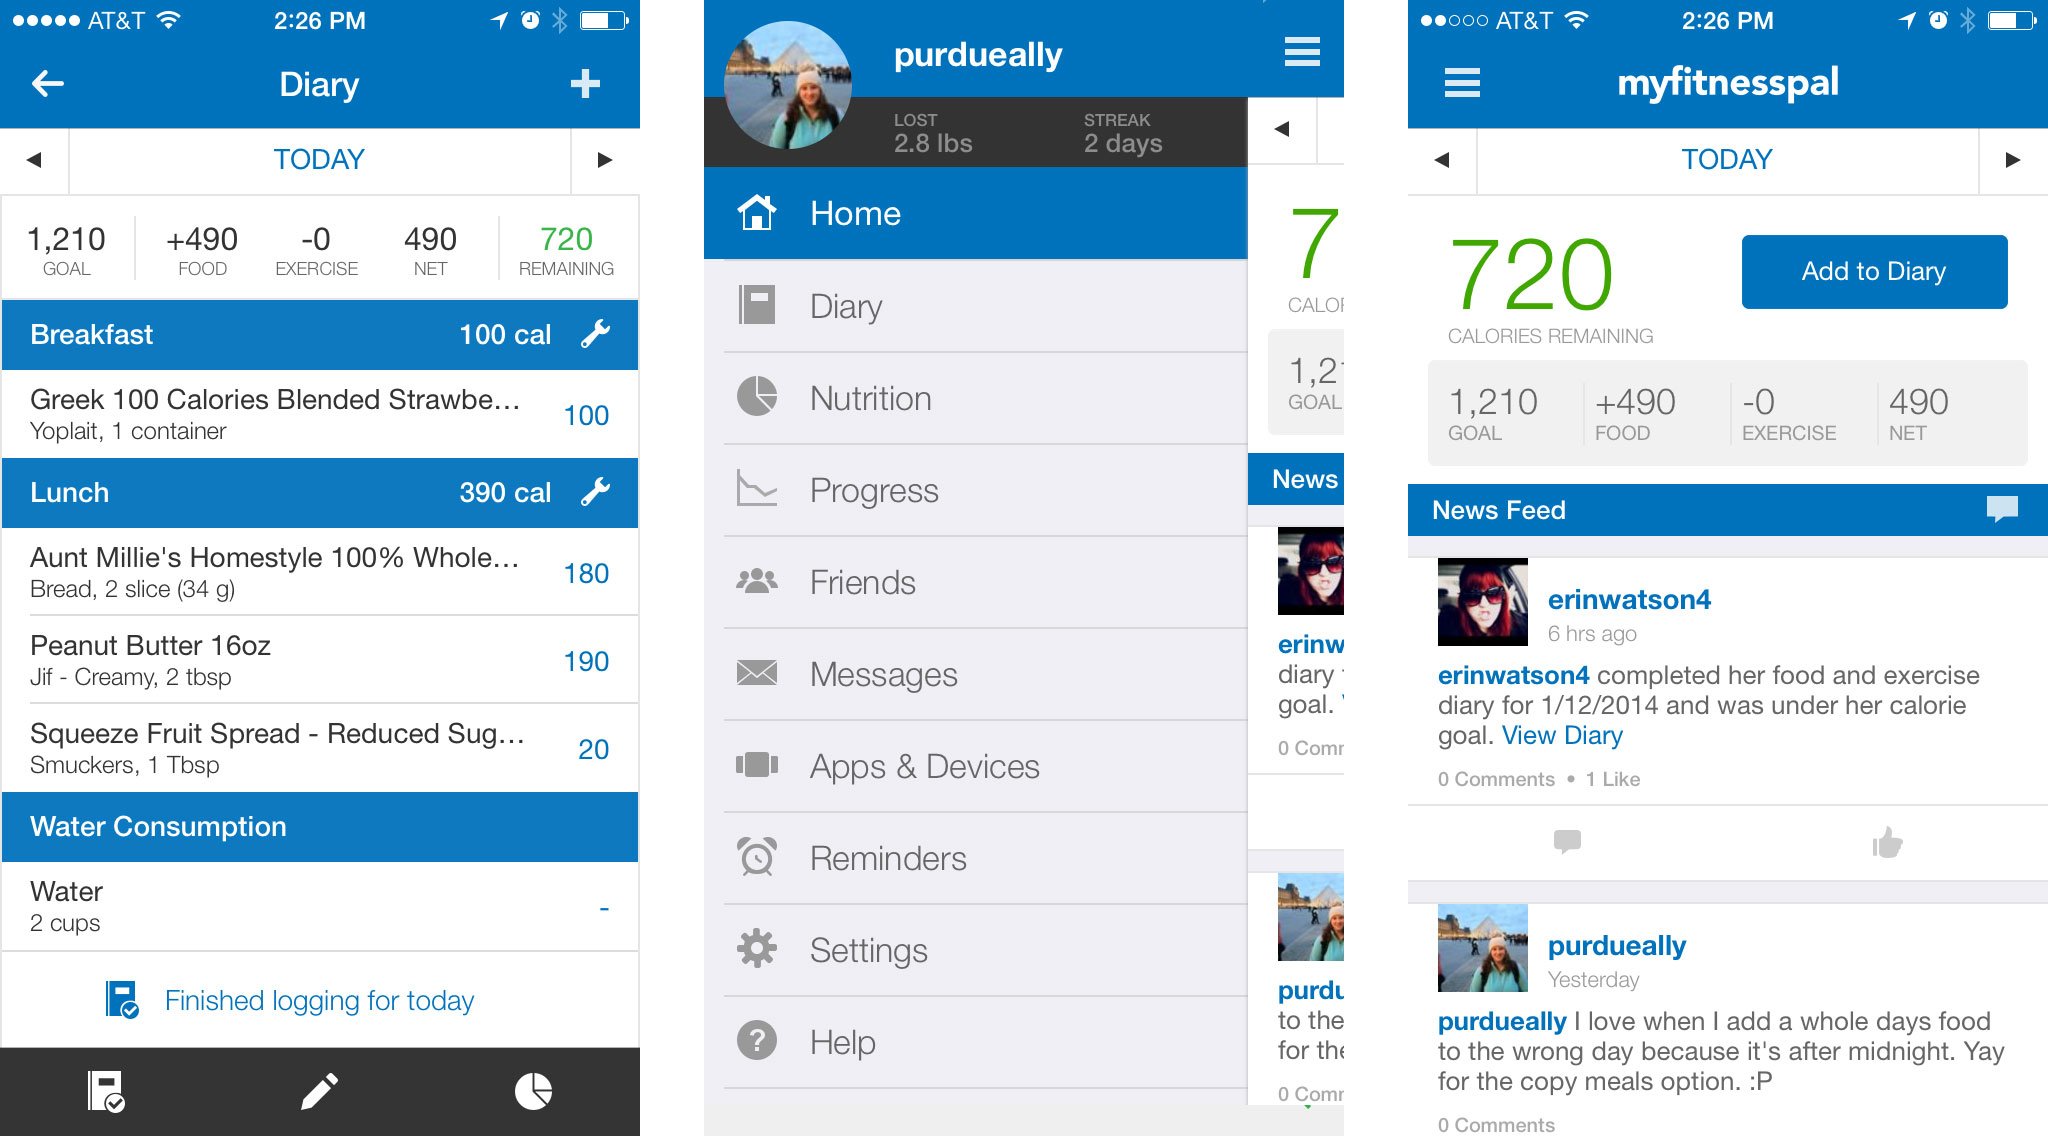 Best calorie counting and diet apps for iPhone: MyFitnessPal